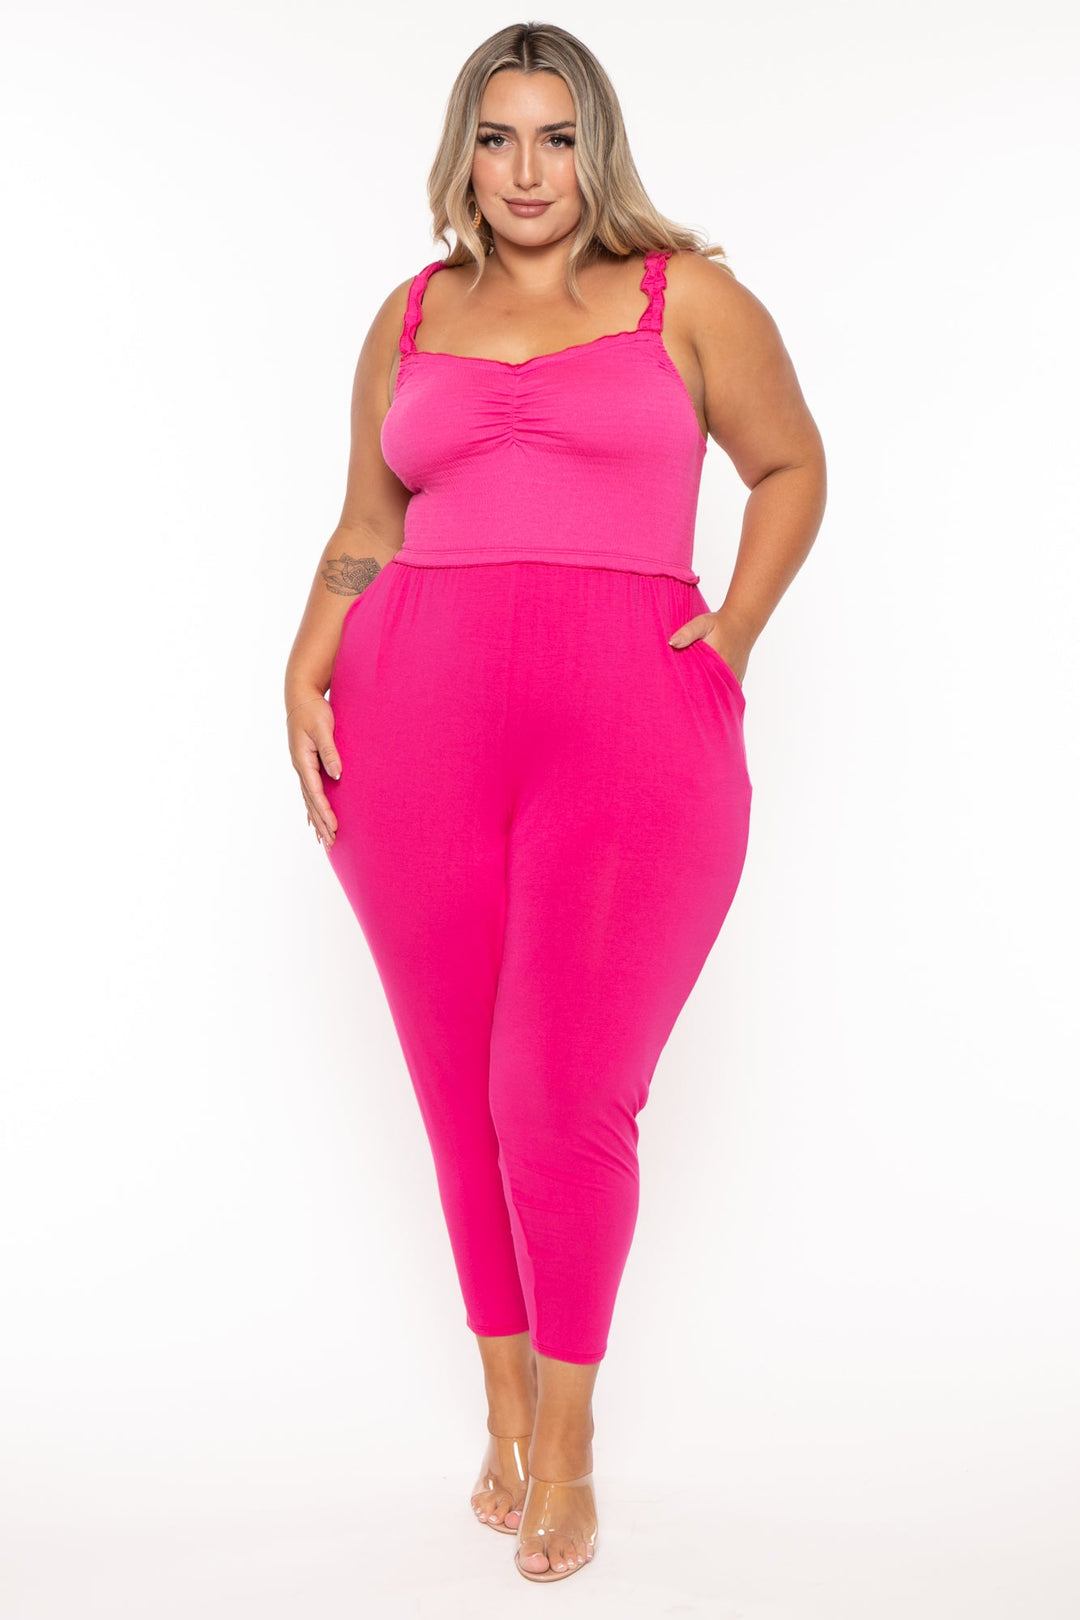  Rompers and Jumpsuits for Women Plus Size Plus Size Jumpsuits  for Women Dressy Wide Leg Jumpsuits Sexy (Hot Pink, XXL) : Clothing, Shoes  & Jewelry